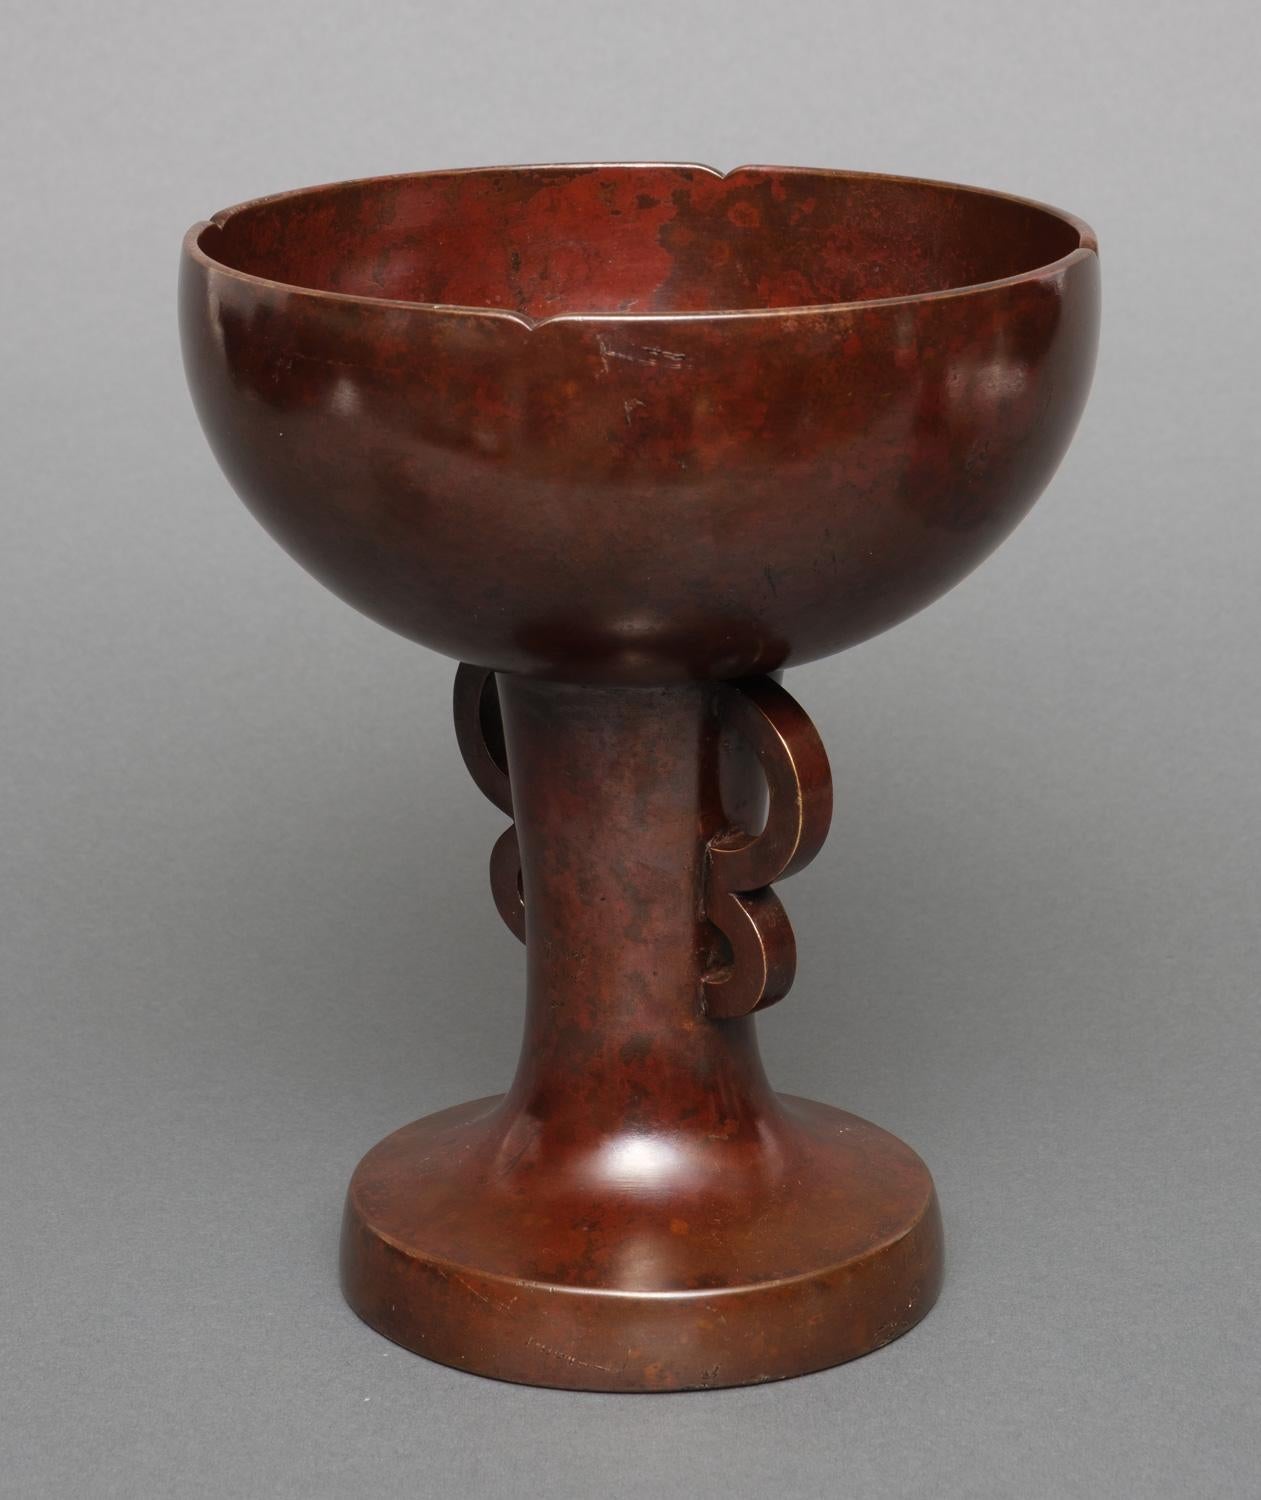 Exceptionally shaped bronze vase with a striking ‘coarse’-textured red mottled patina. The bowl subtly shaped like a flower, its slightly concave body flanked by ‘butterfly wing’-shaped ears, transcending in a circular foot with a broad